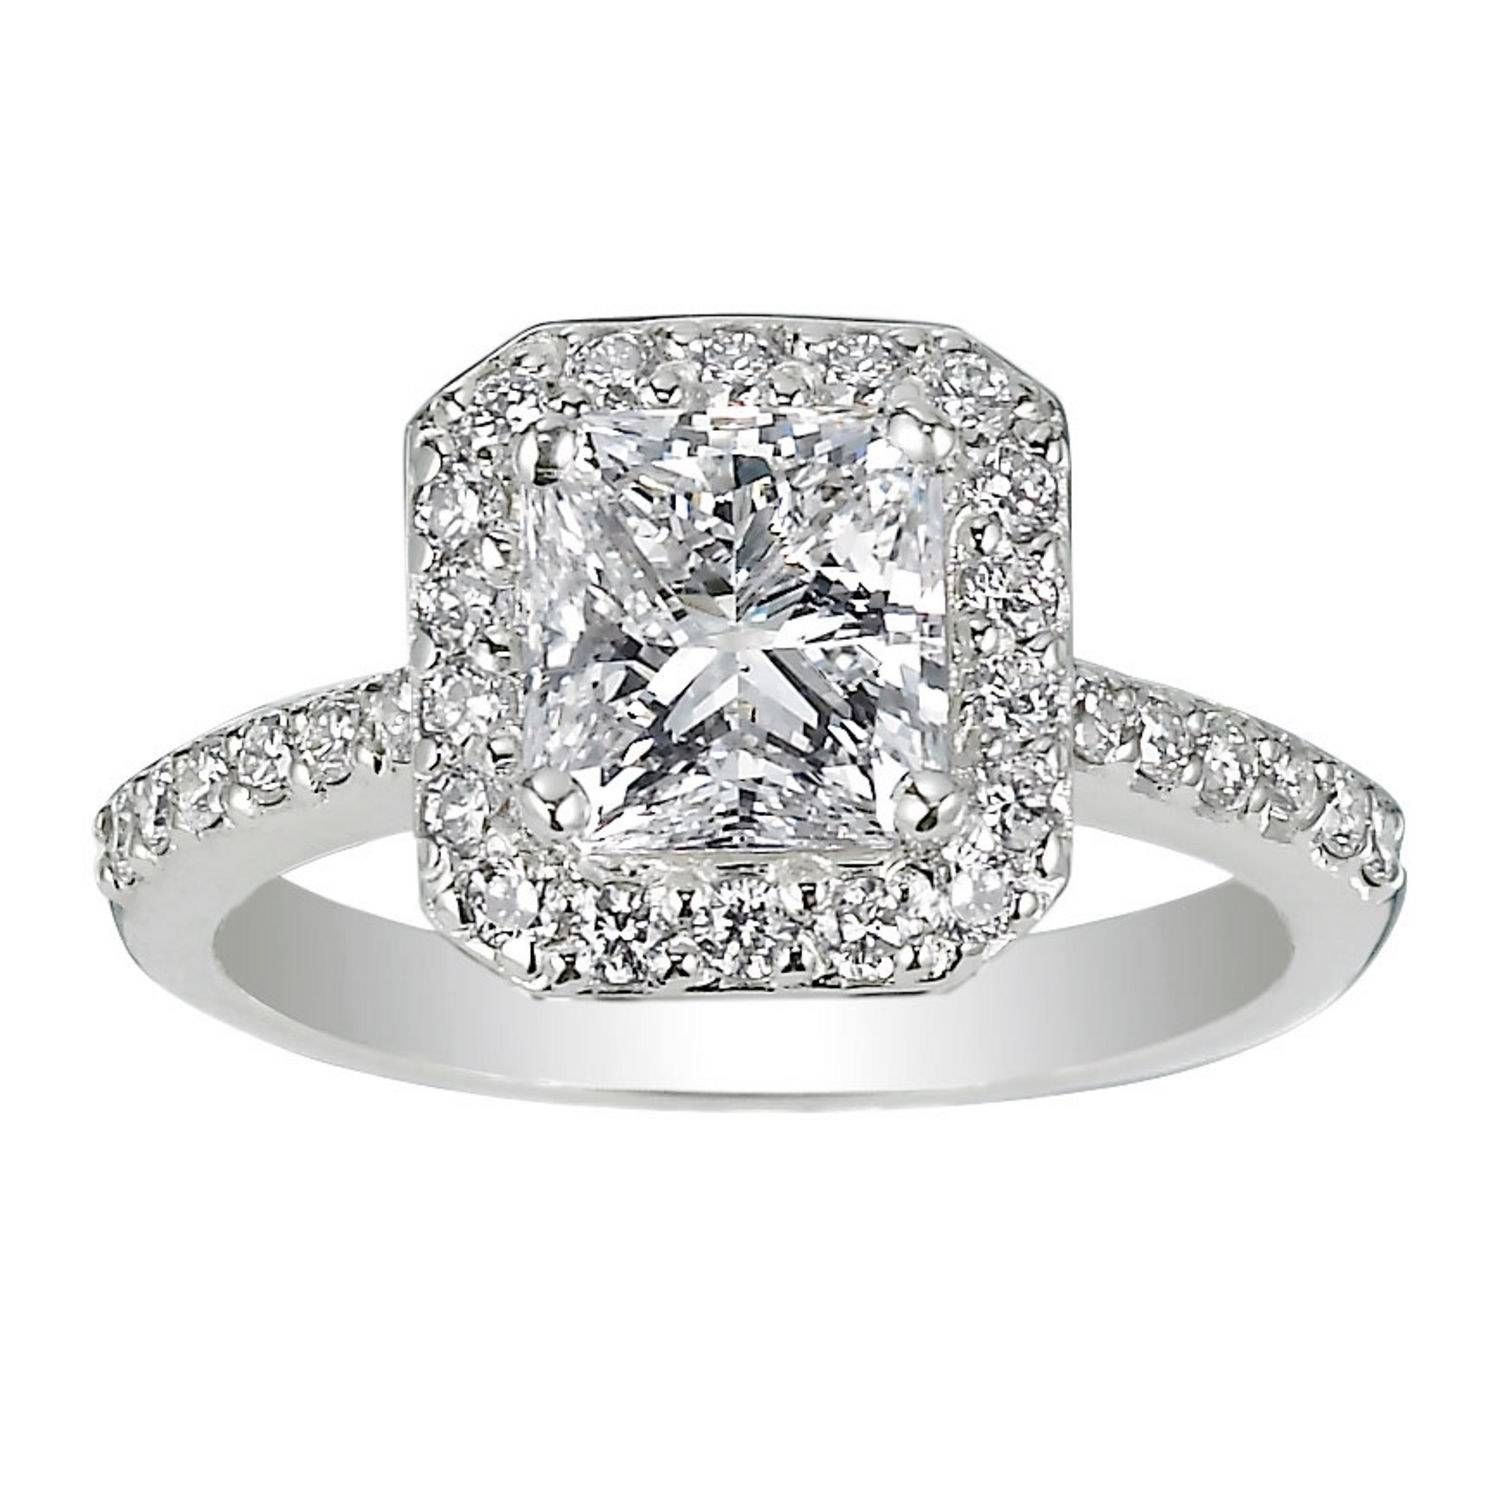 62 Diamond Engagement Rings Under $5,000 | Glamour For Diamond Wedding Rings For Her (View 1 of 15)